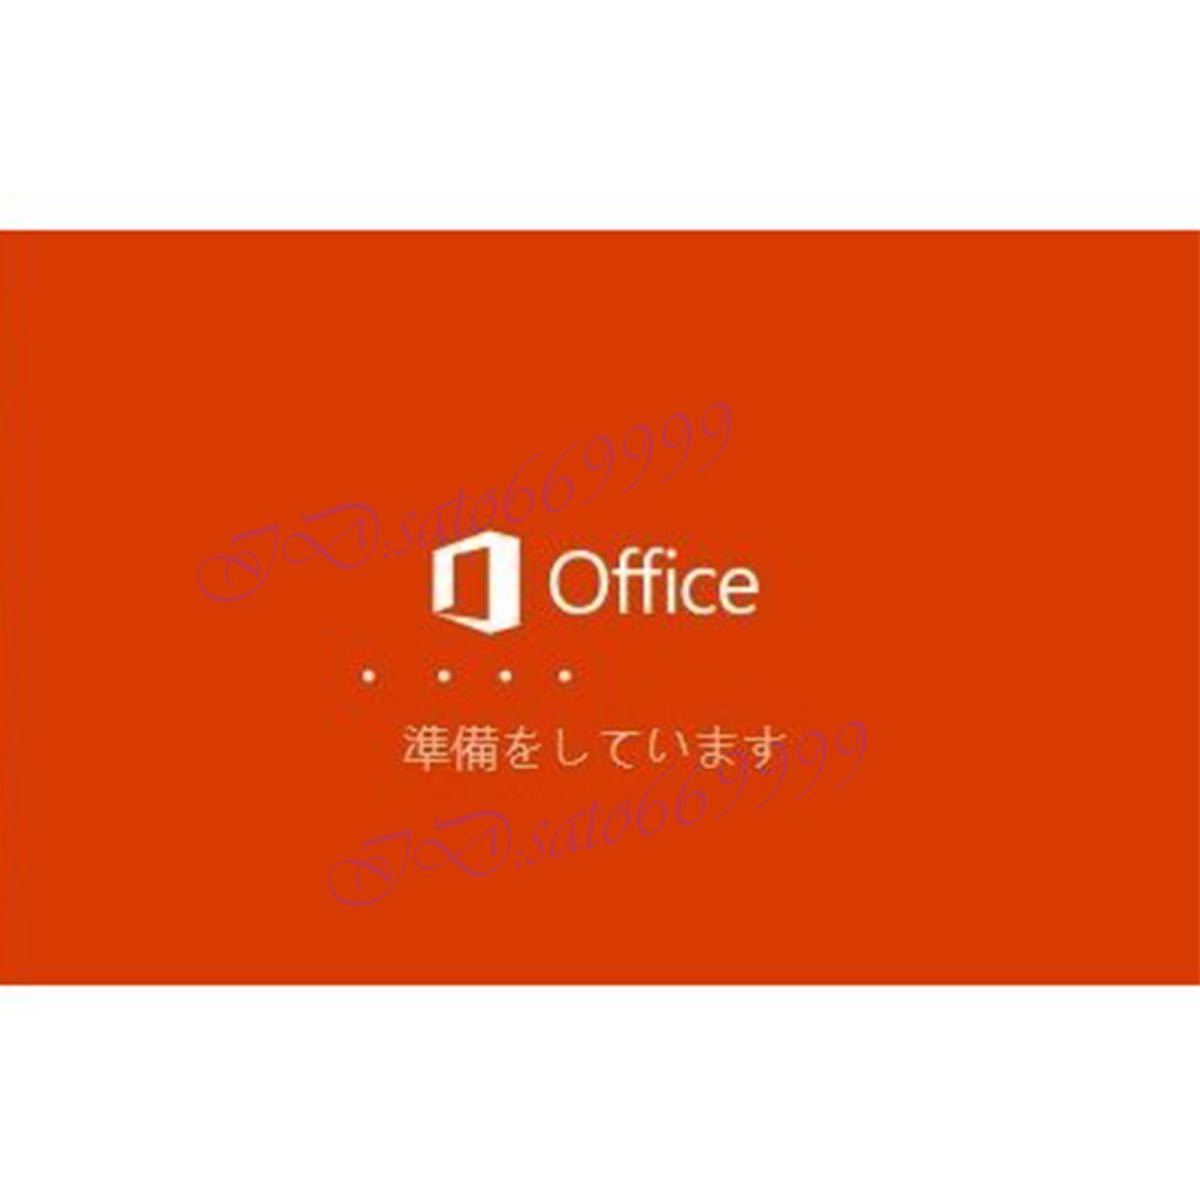 * safety support * Microsoft Office 2021 Professional Plus office2021 Pro duct key Access Word Excel PowerPoin regular certification guarantee Japanese 2